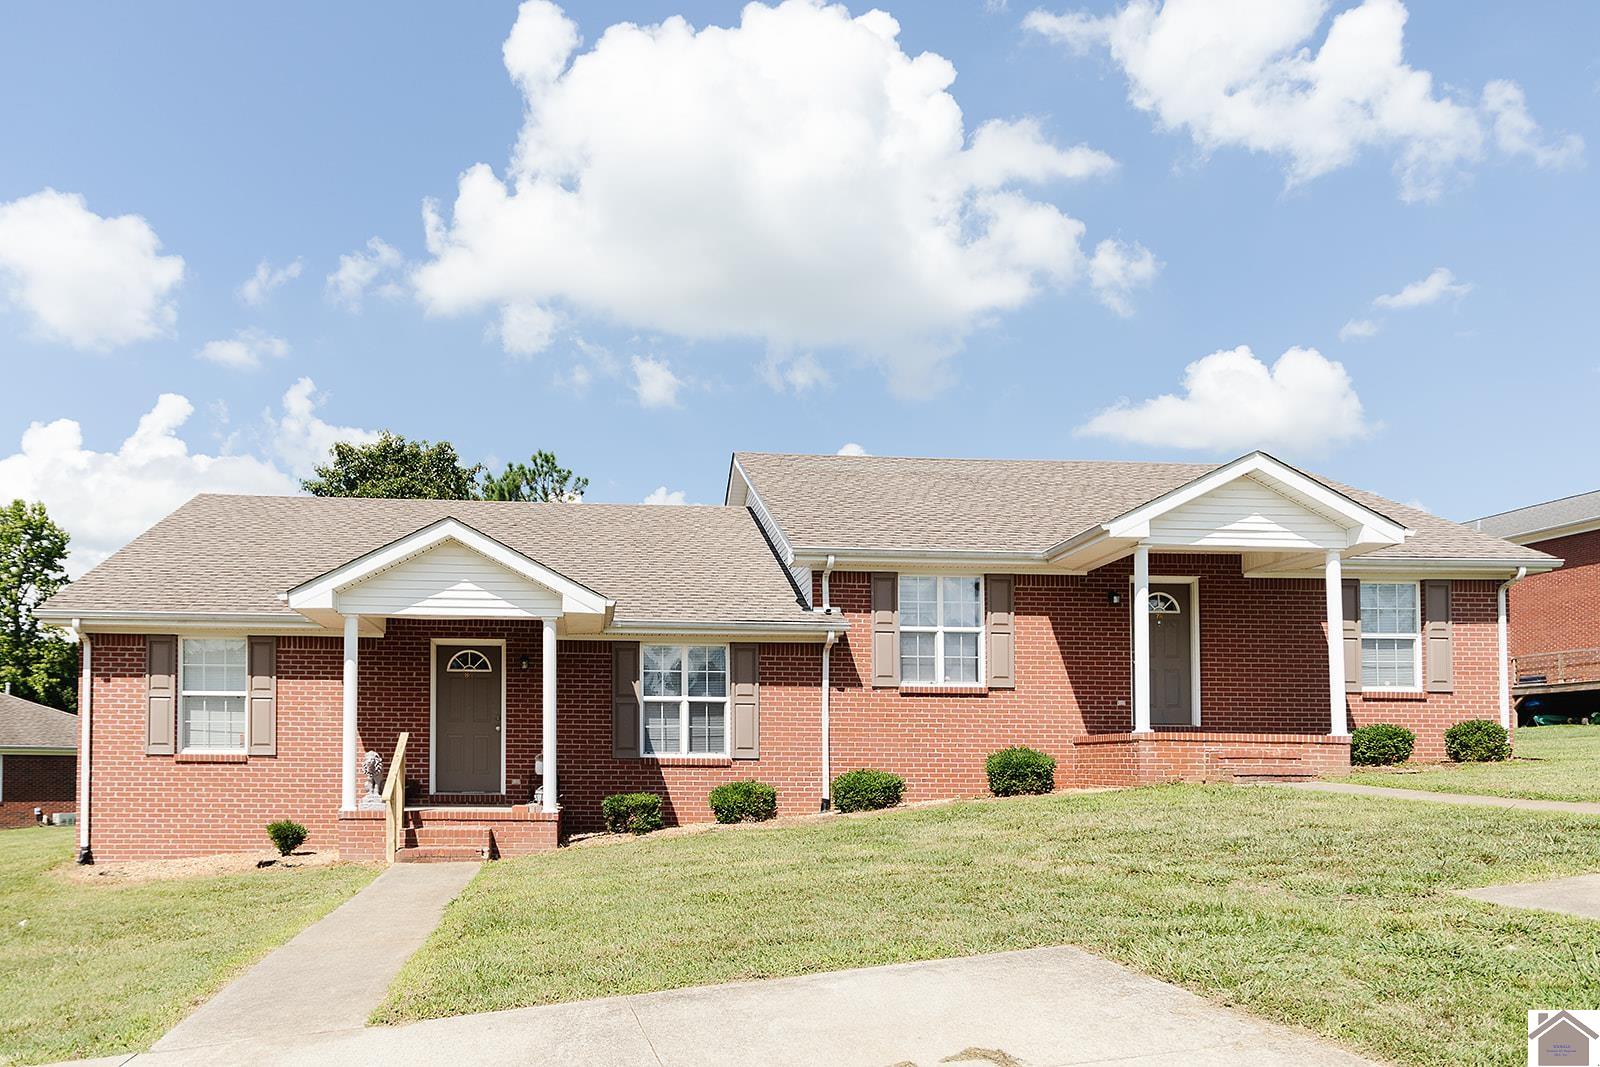 78/80 Welch Dr., Murray, KY 42071